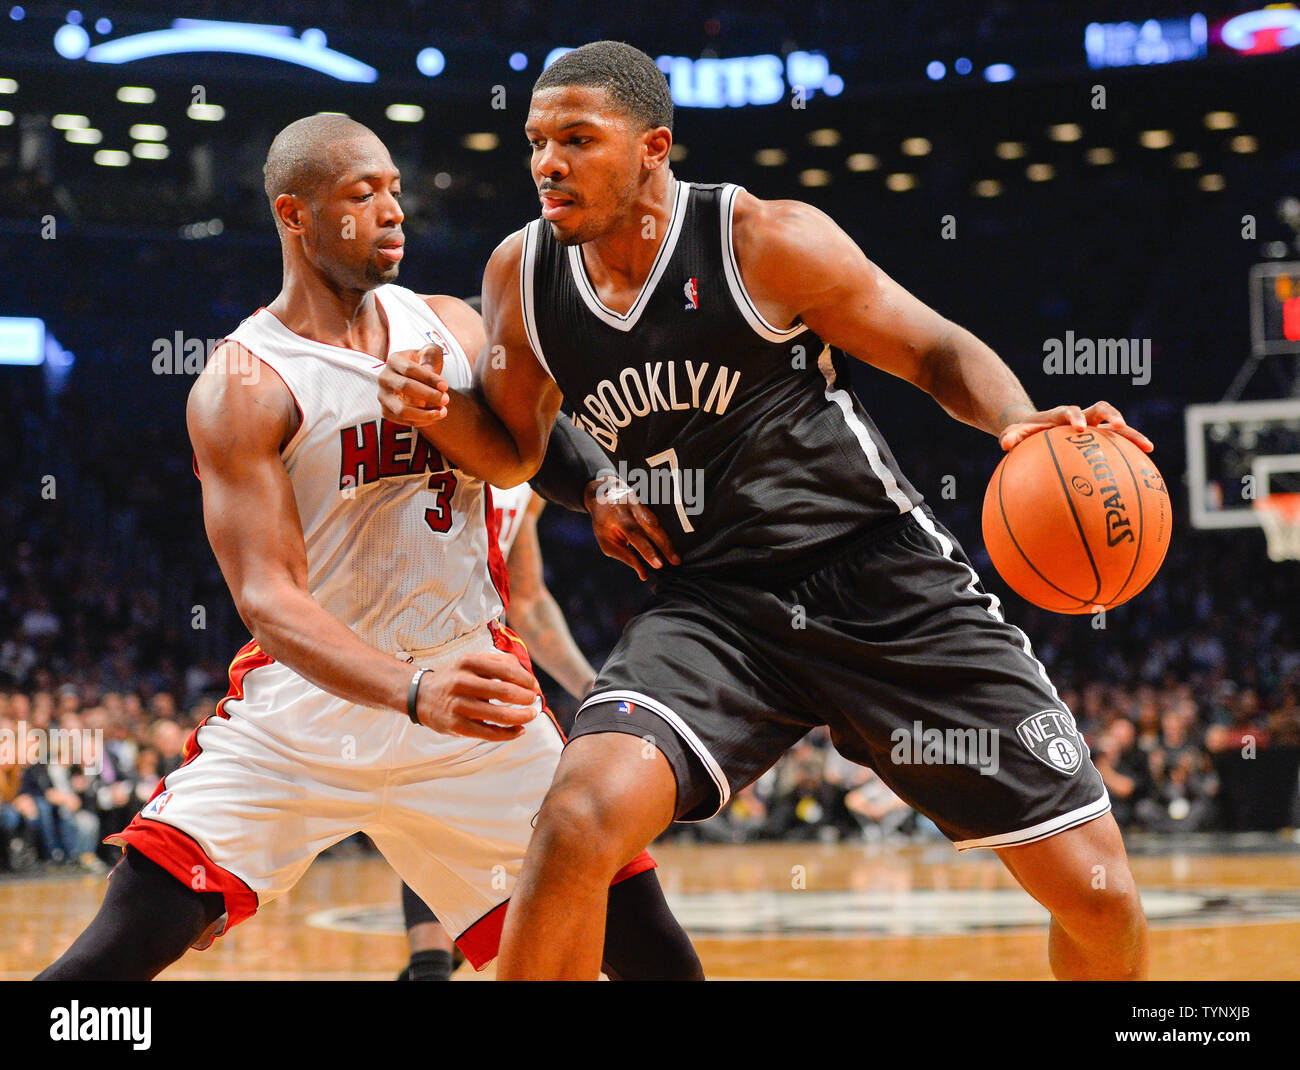 Brooklyn Nets shooting guard Joe Johnson (7) drives in against Miami Heat shooting guard Dwyane Wade (3) in the fourth quarter at Barclays Center in New York City on November 1, 2013.   UPI/Rich Kane Stock Photo